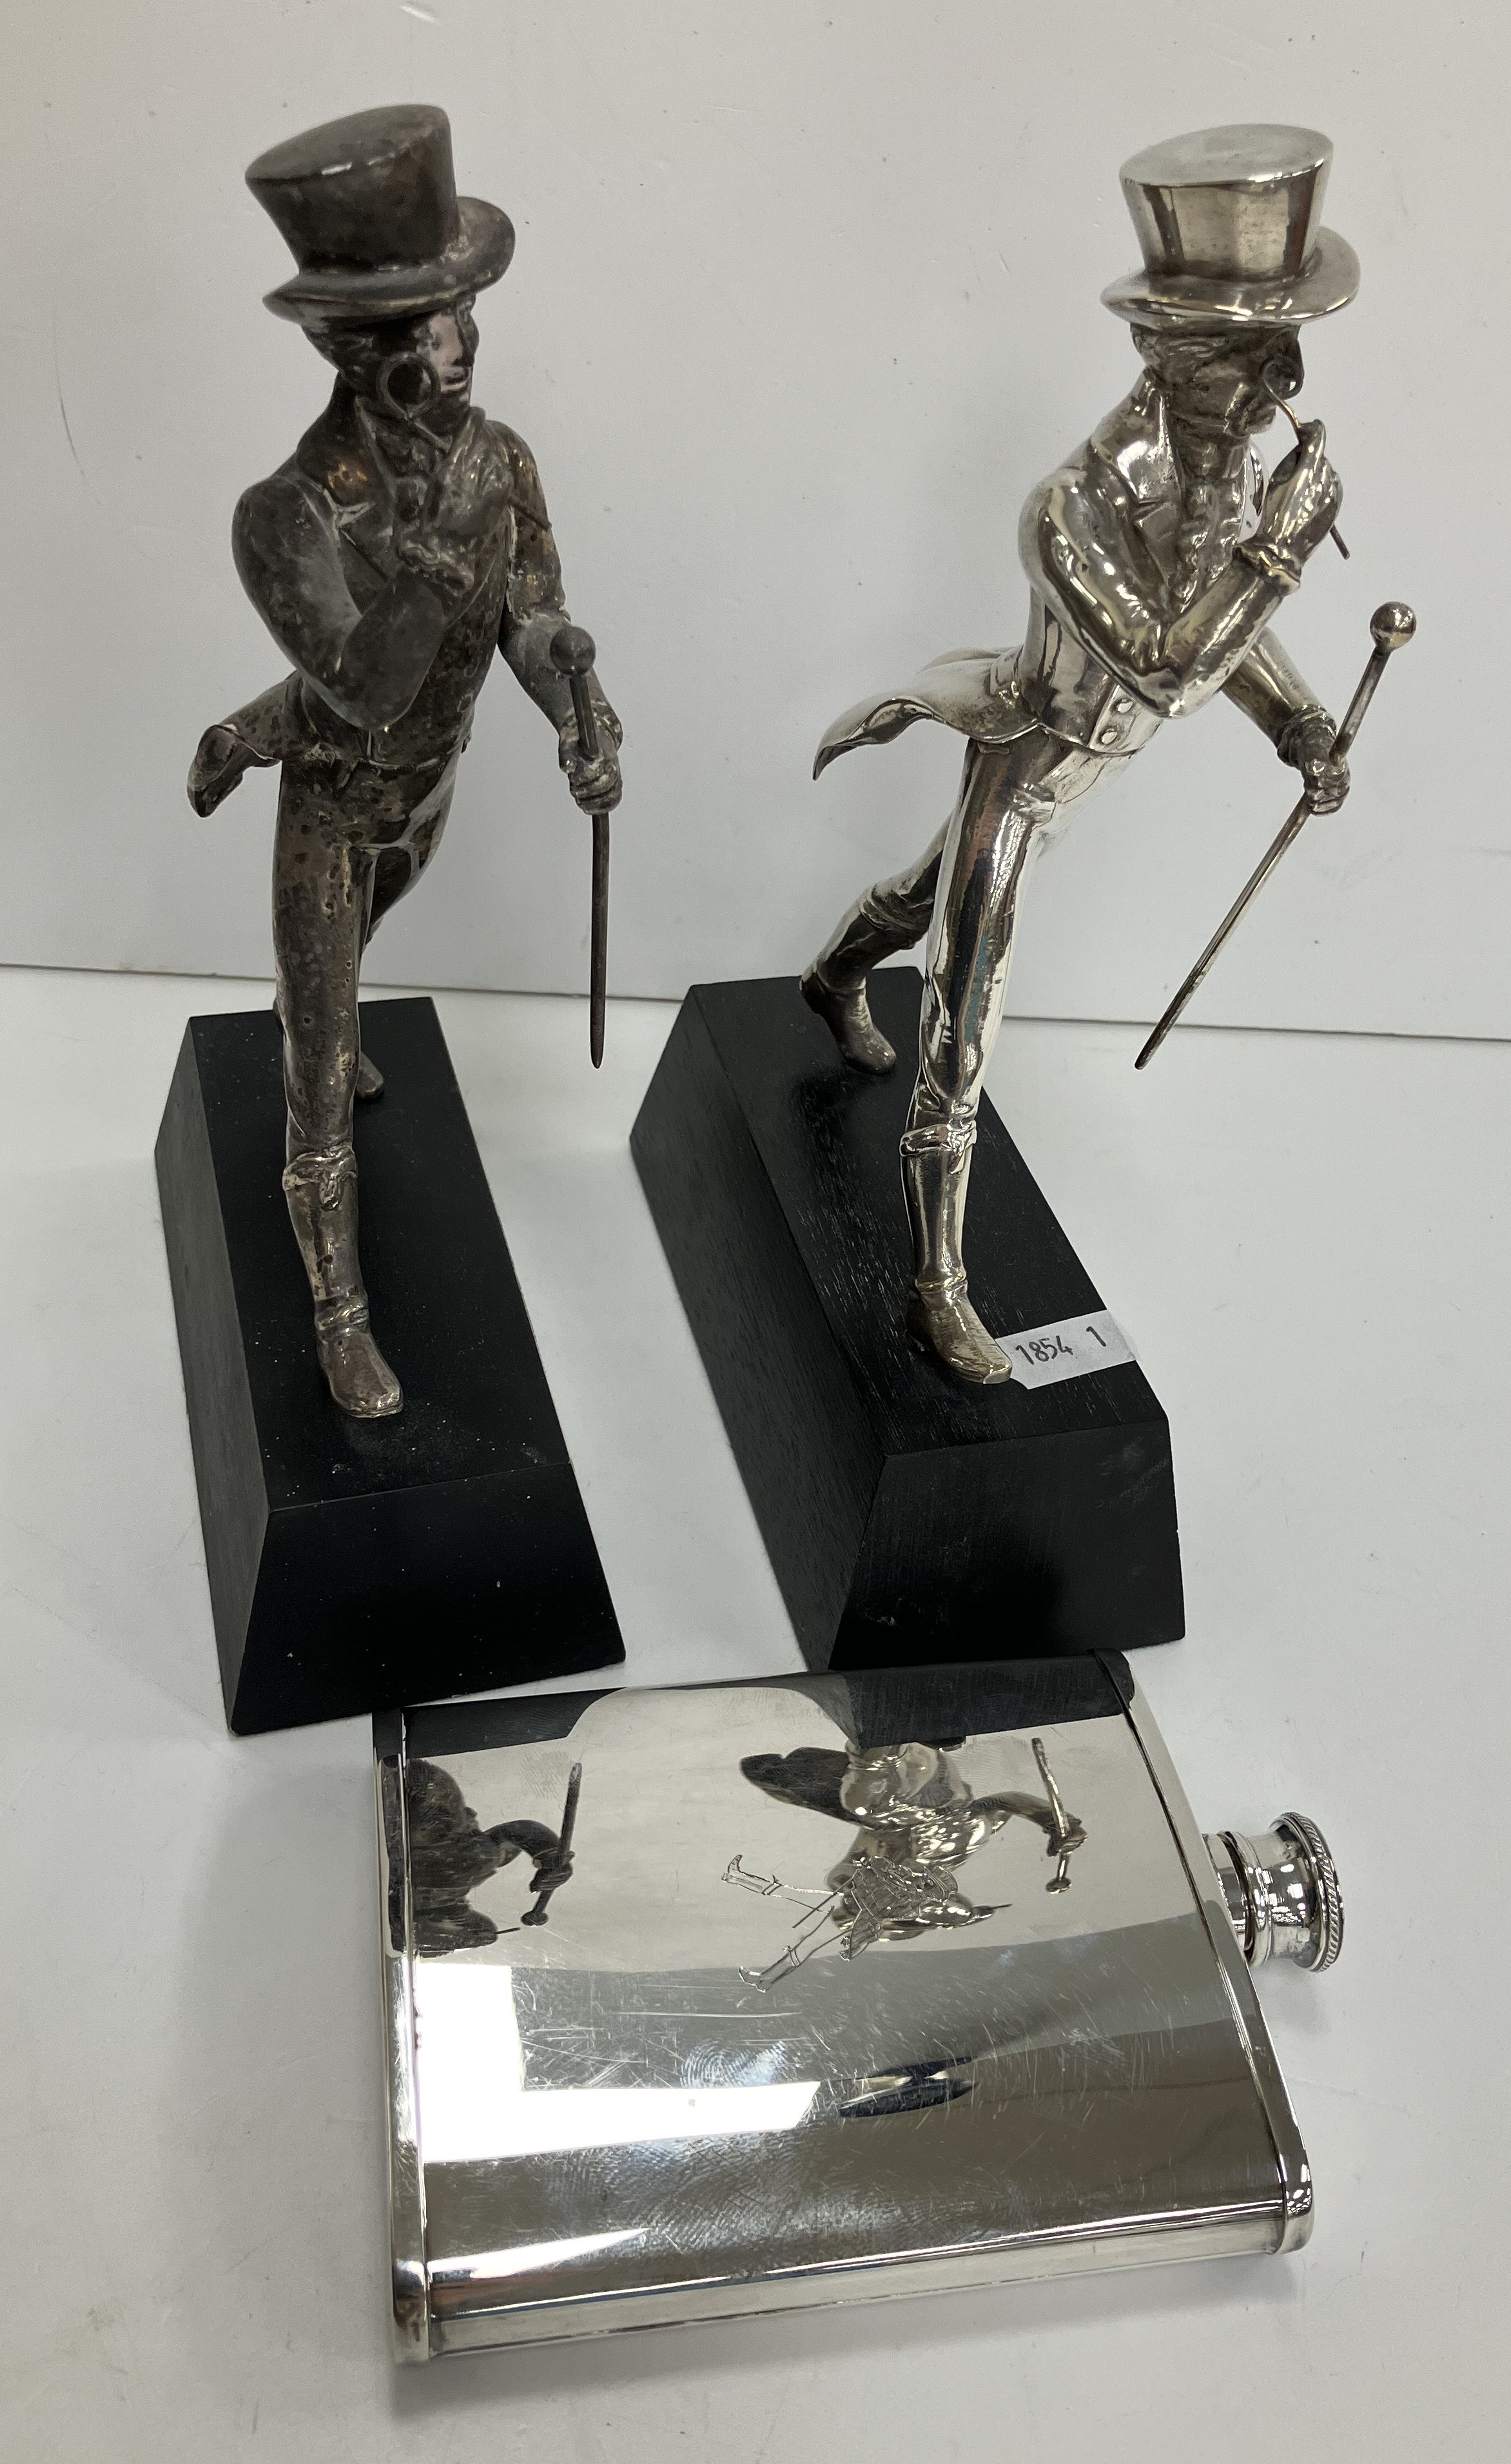 Two plated "Johnnie Walker" advertising figures on ebonised wooden bases, 22.